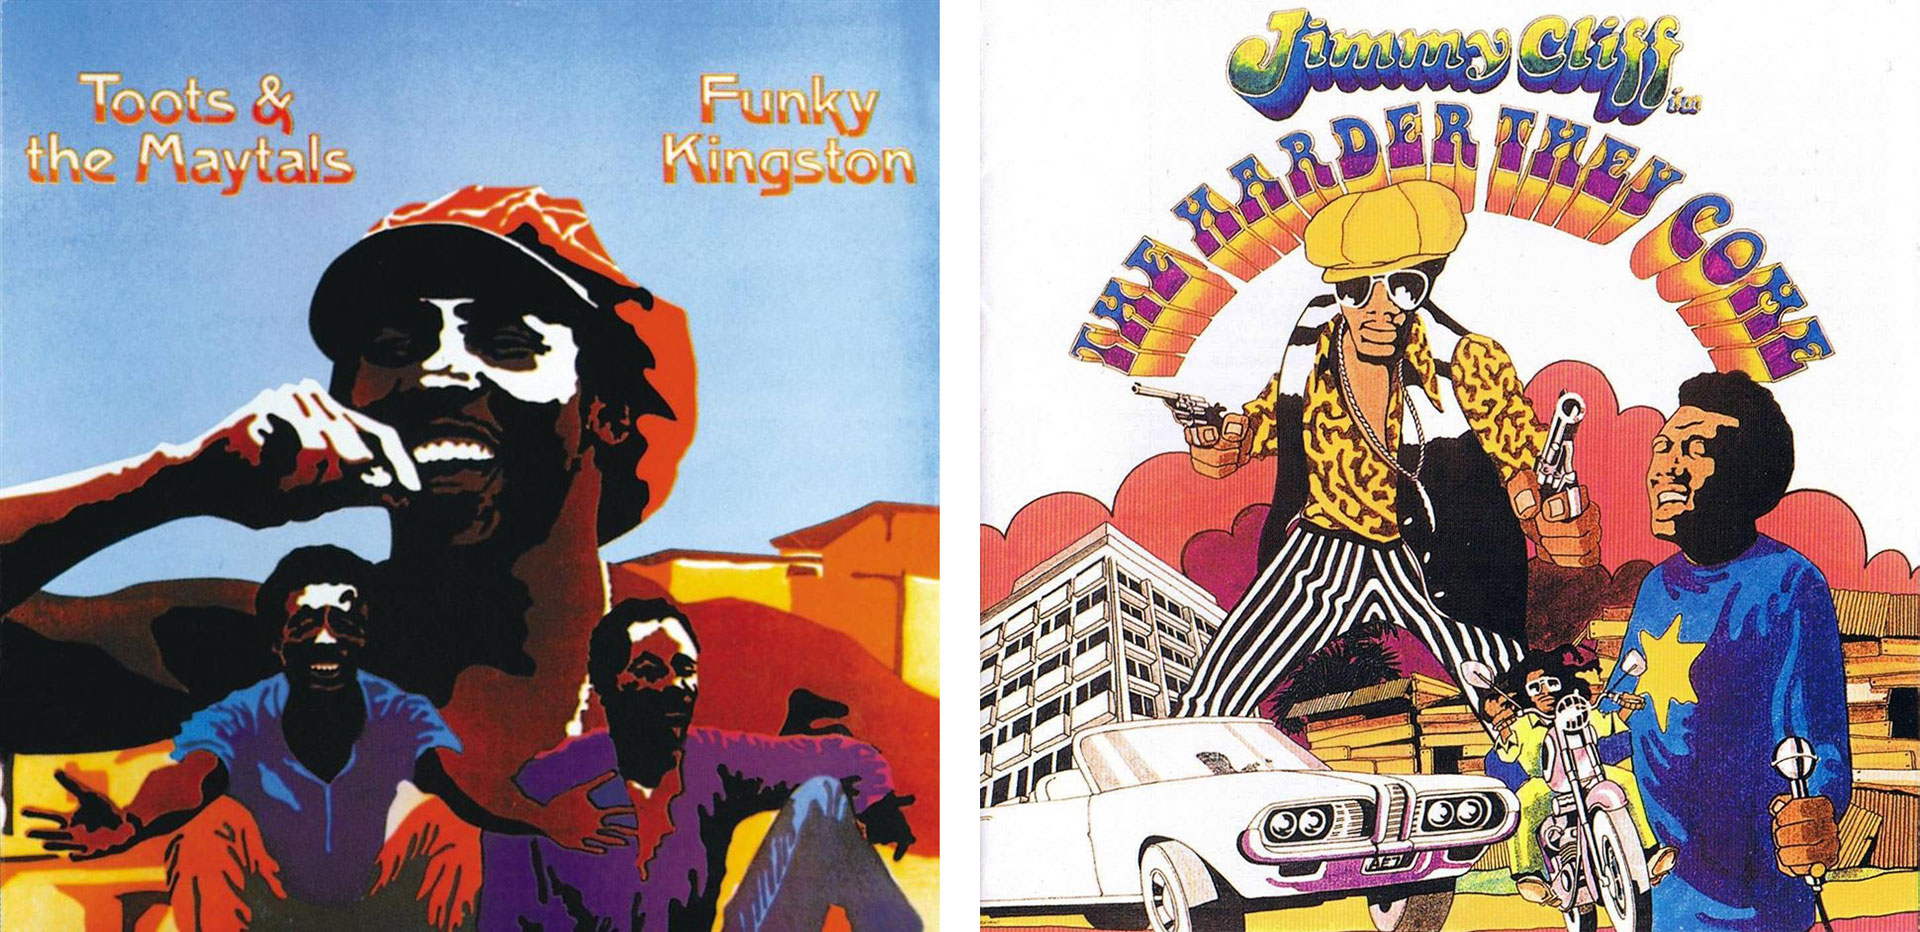 Early moments for Toots and the Maytals' popularity included the albums 'Funky Kingston' (L) and the soundtrack to 'The Harder They Come' (R).